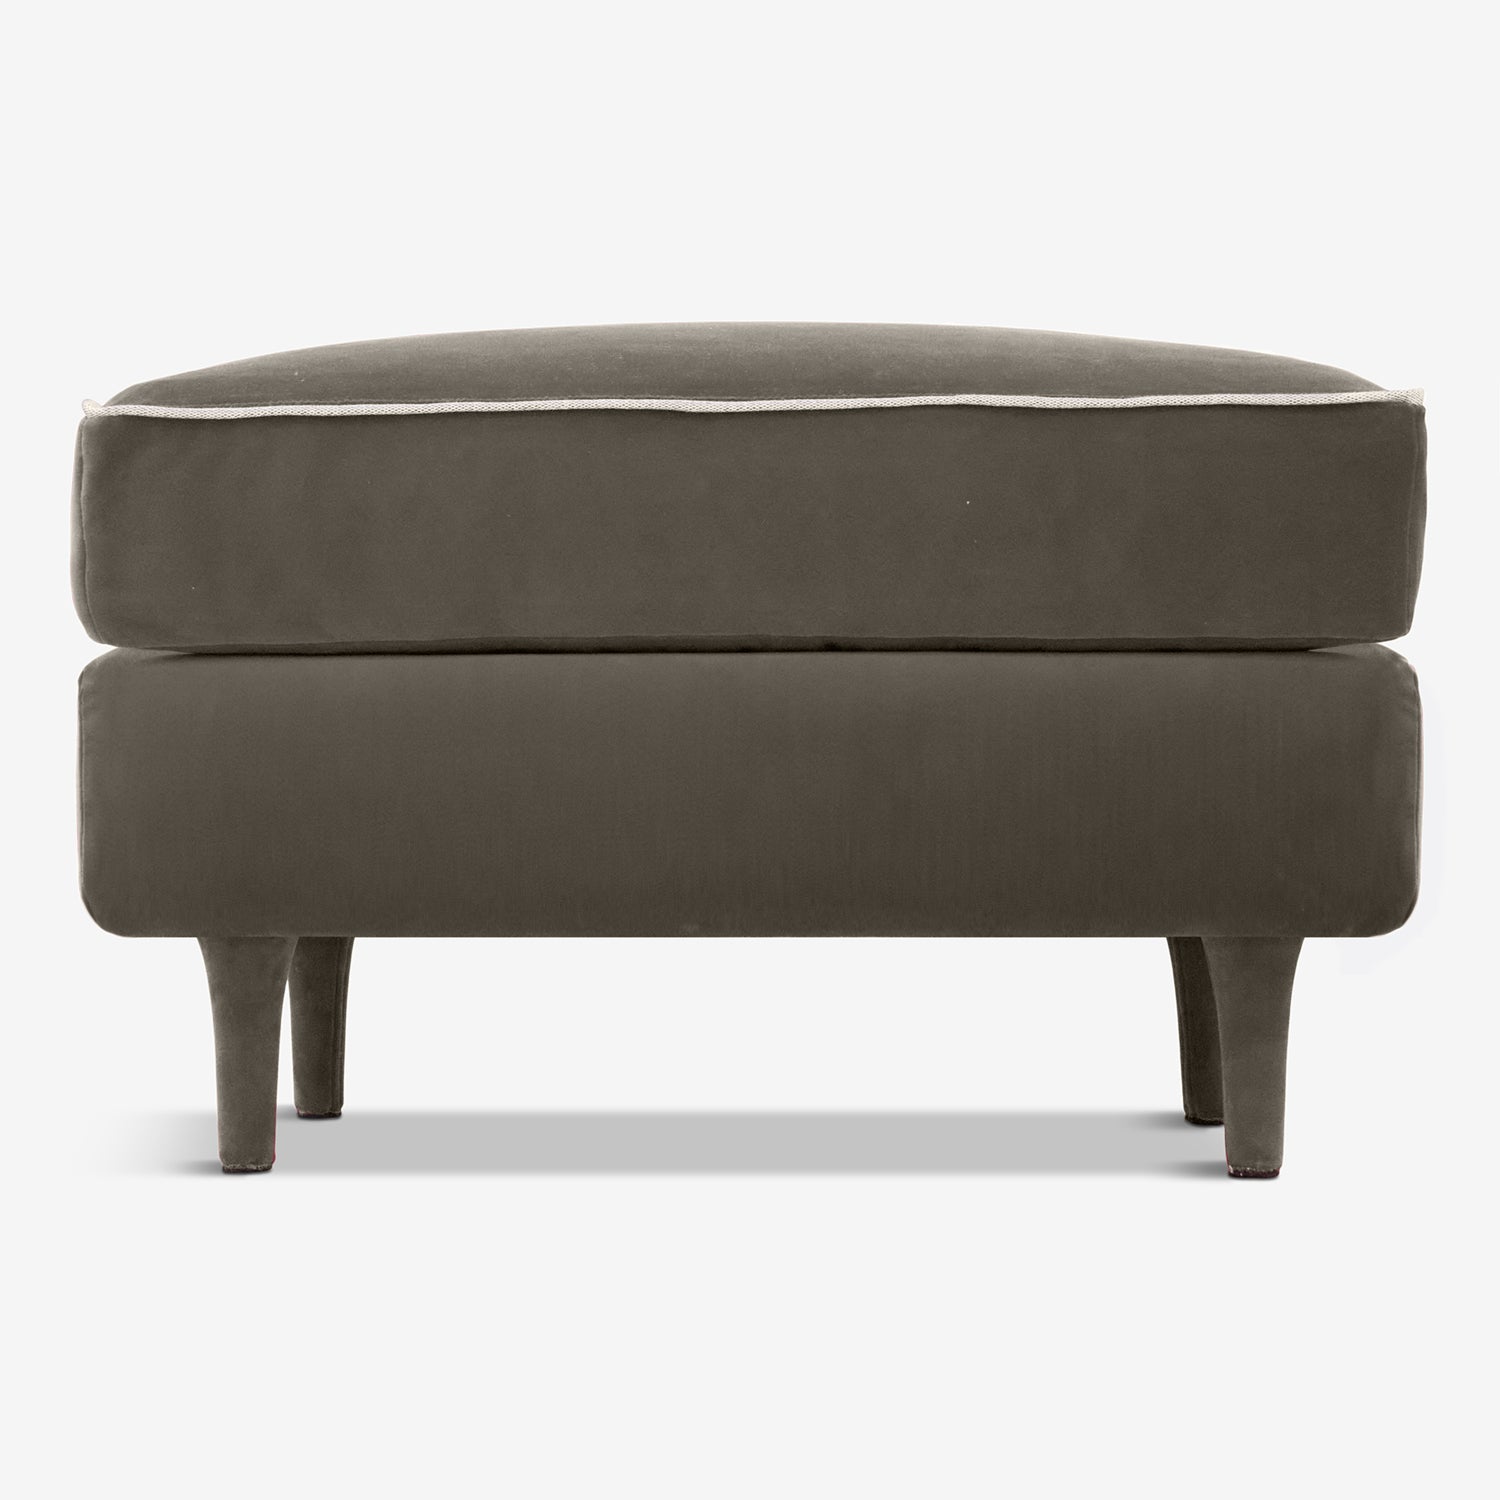 Goose Down Layered Pouf - Stylish Accent in grey velvet